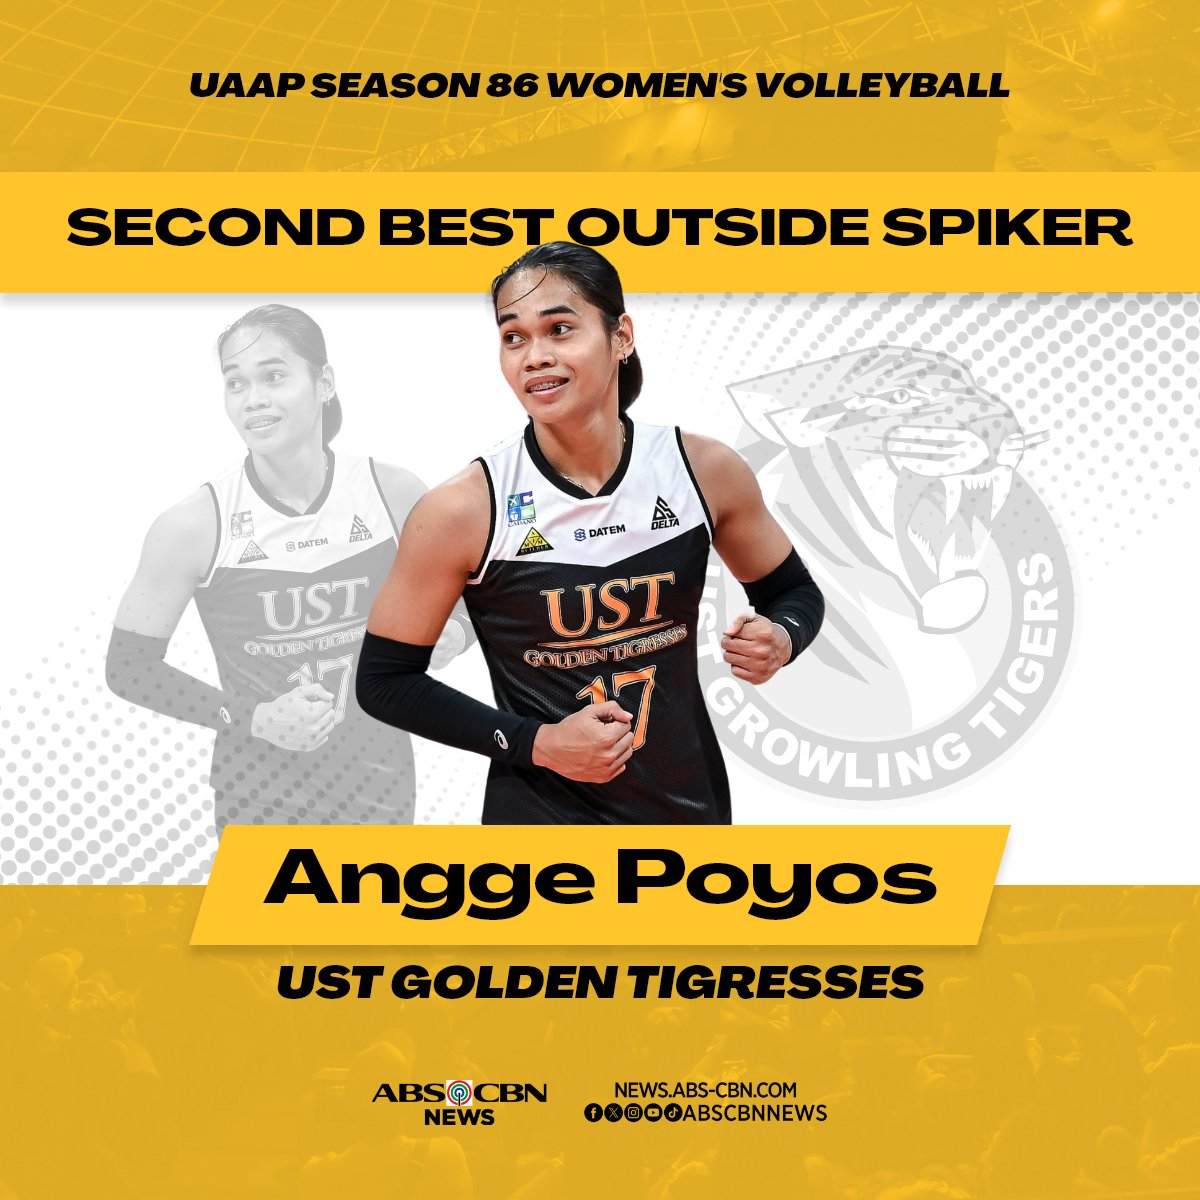 NU's Bella Belen and UST's Angge Poyos are your Best Outside Spikers of the #UAAPSeason86 women's volleyball tournament! | via @kennedyzcaacbay